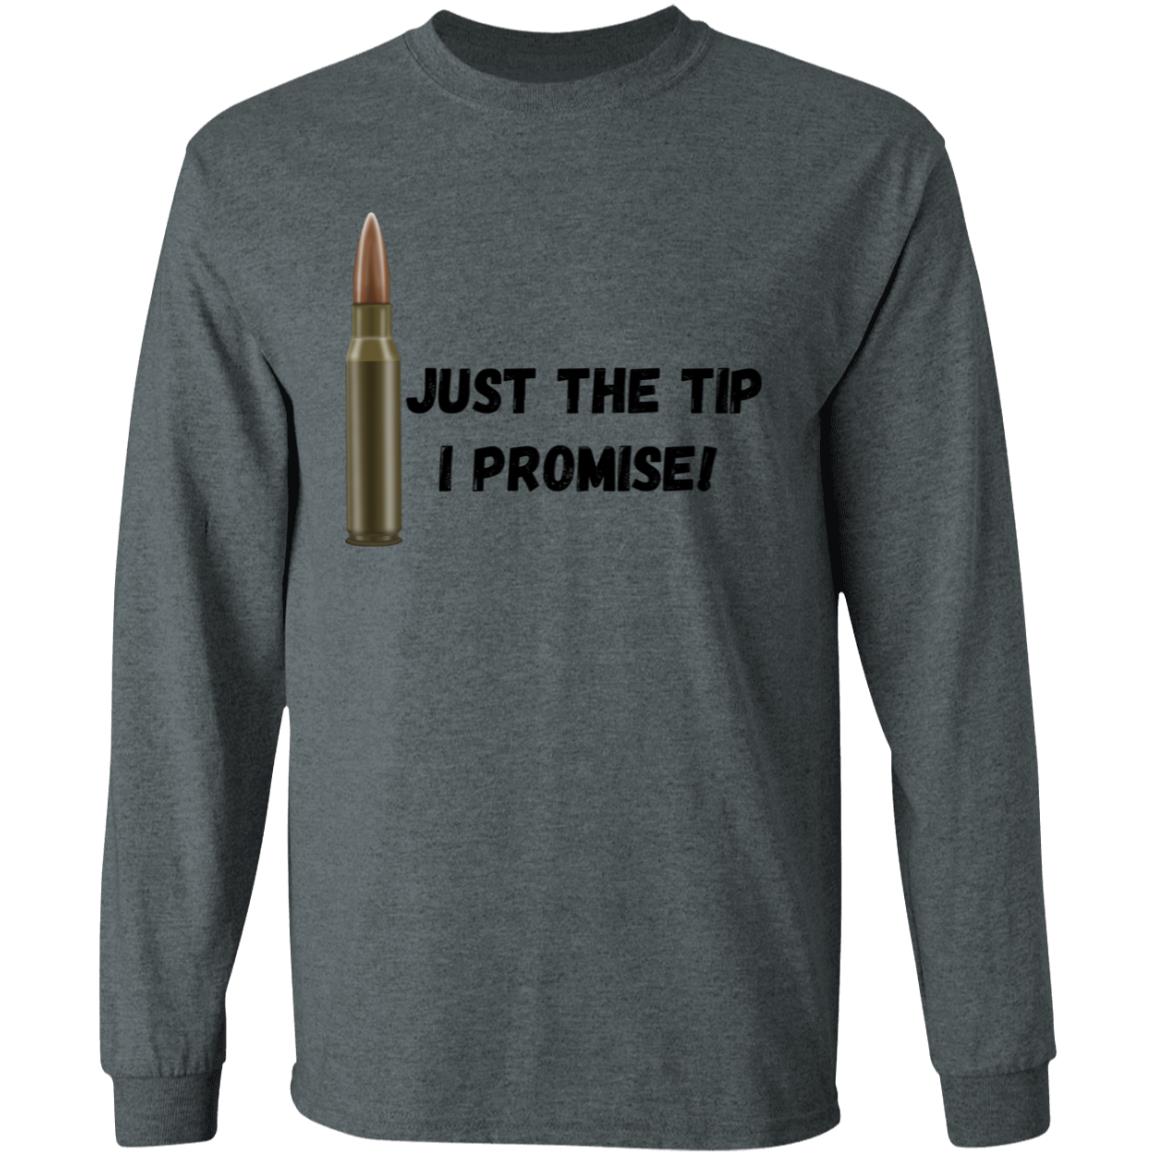 Just the tip, I Promise (Bullet / Hunting) -G540 LS T-Shirt 5.3 oz.